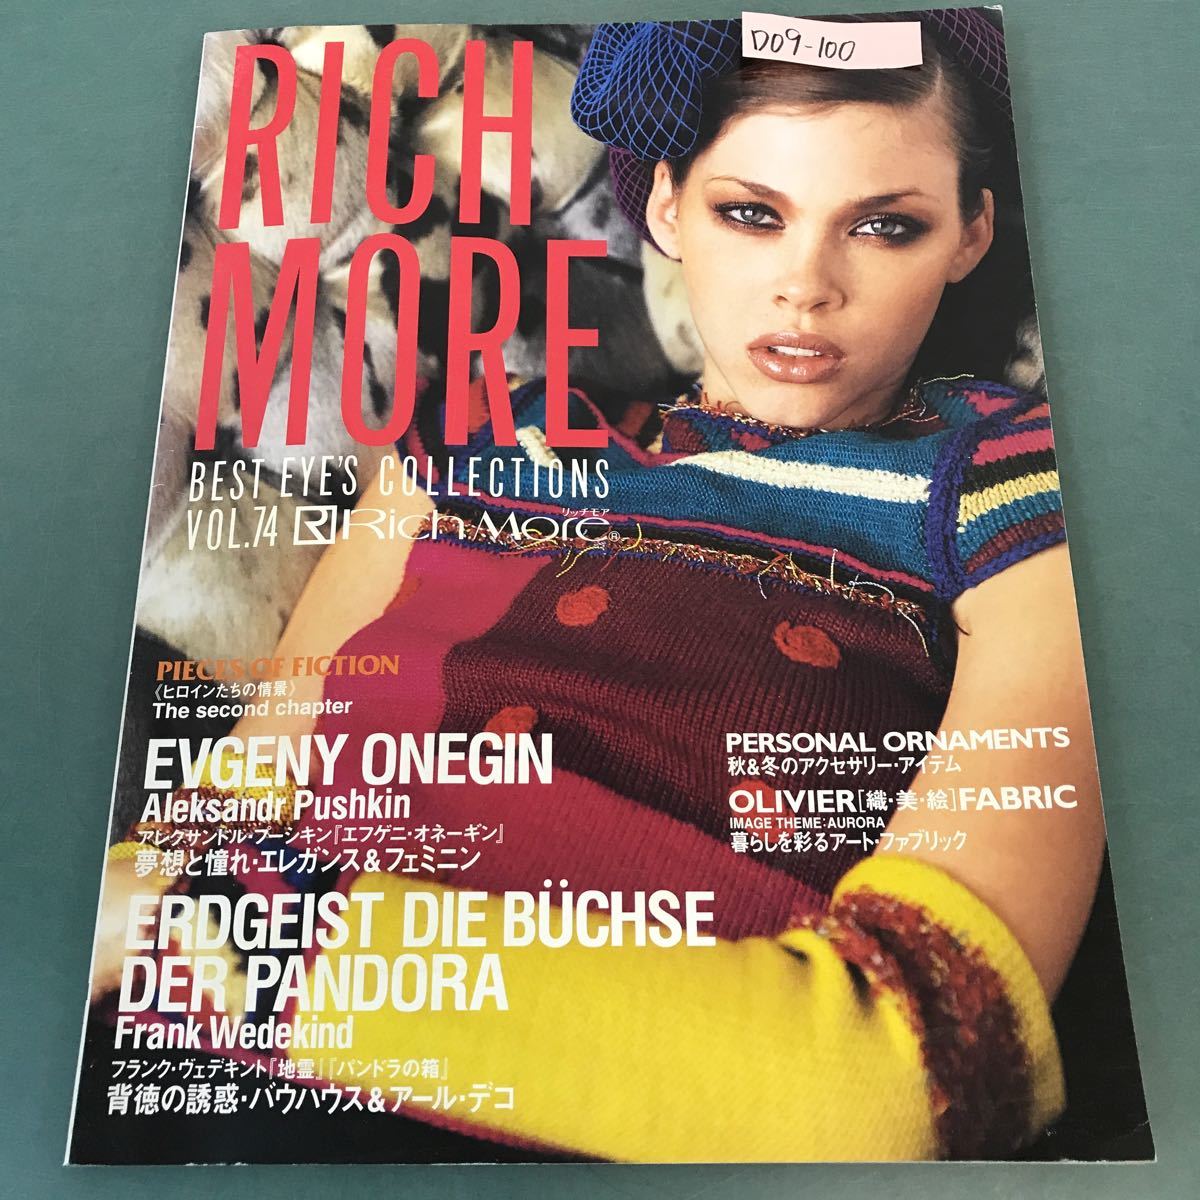 D09-100 RICH MORE BEST EYE'S COLLECTIONS VOL.74 冬号